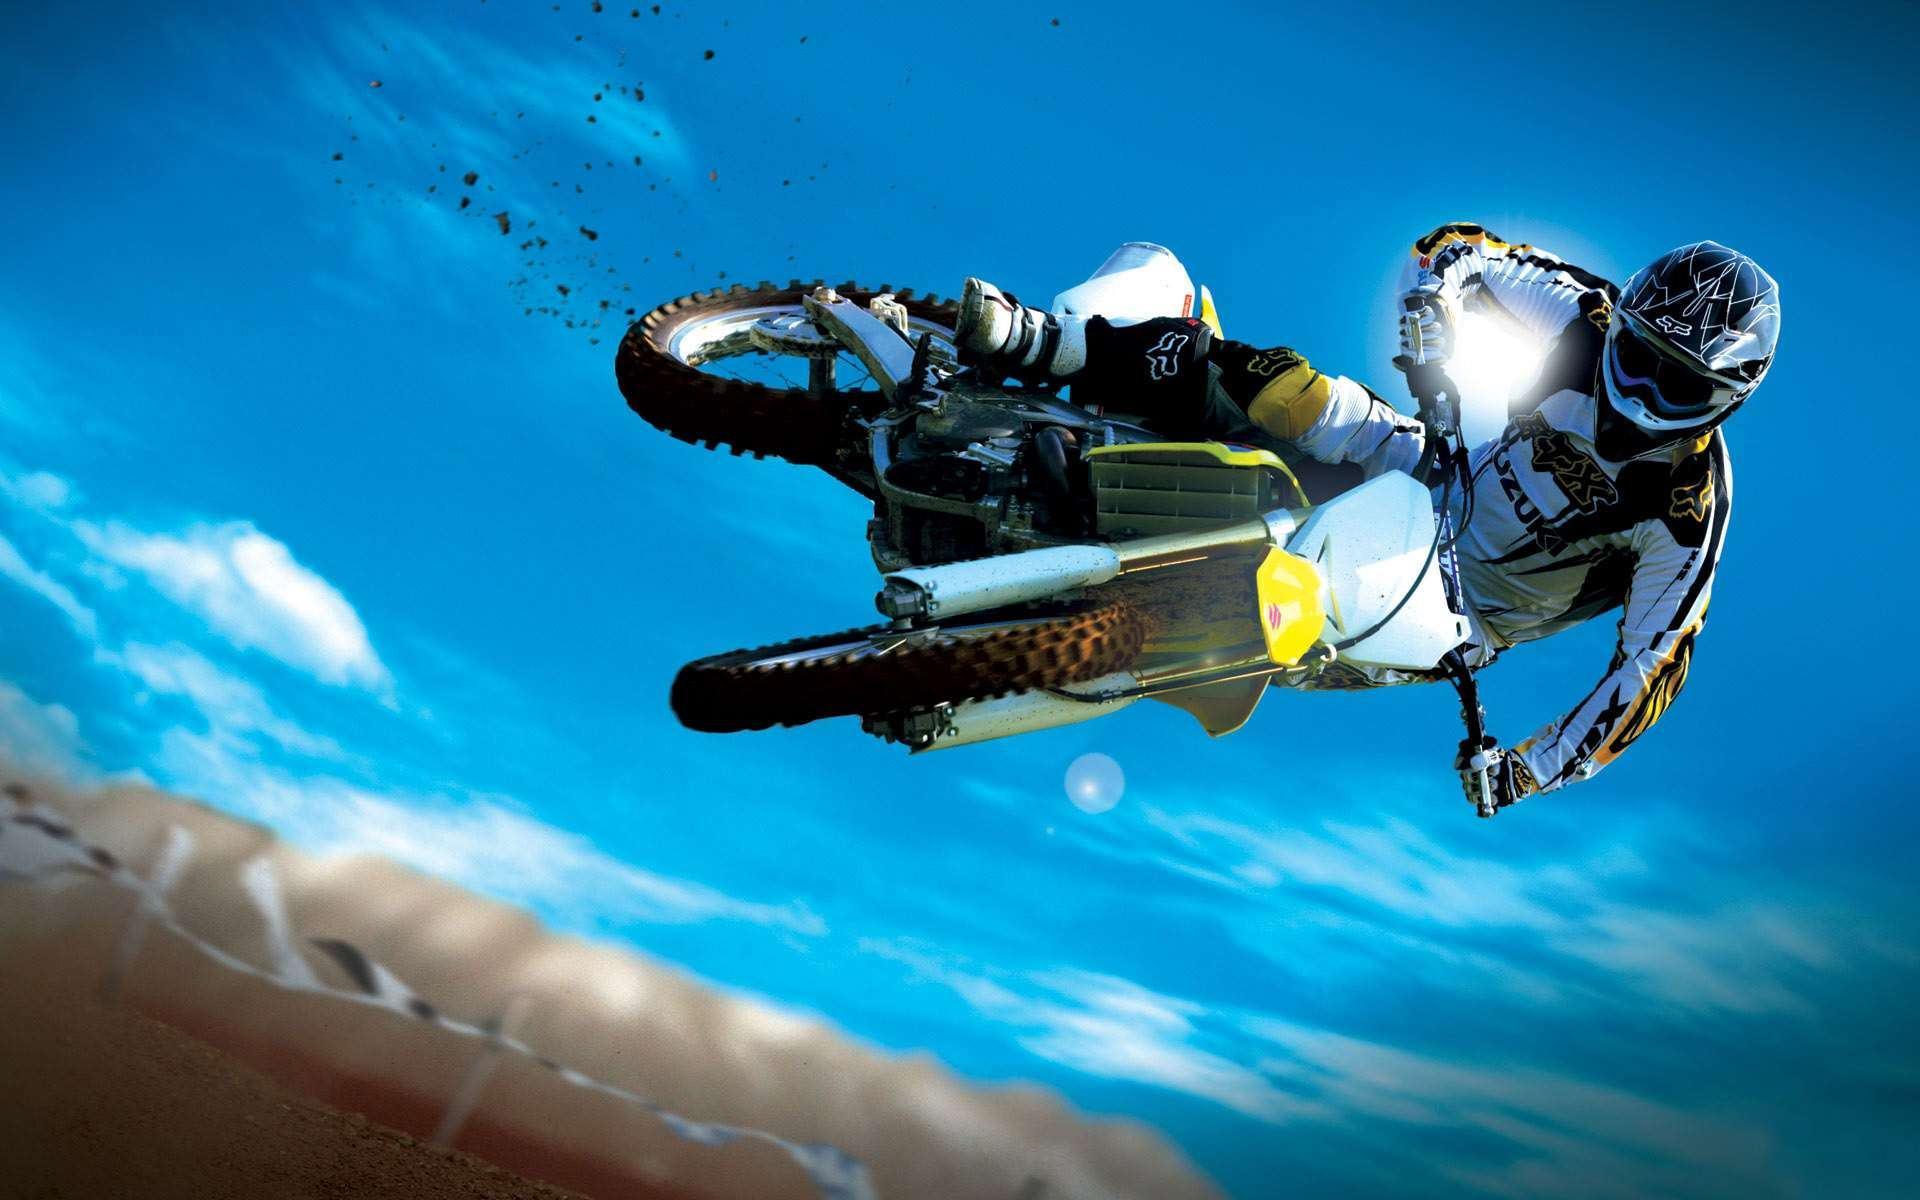 Download Motocross HD Video Wallpaper MOD APK v11.0 for Android